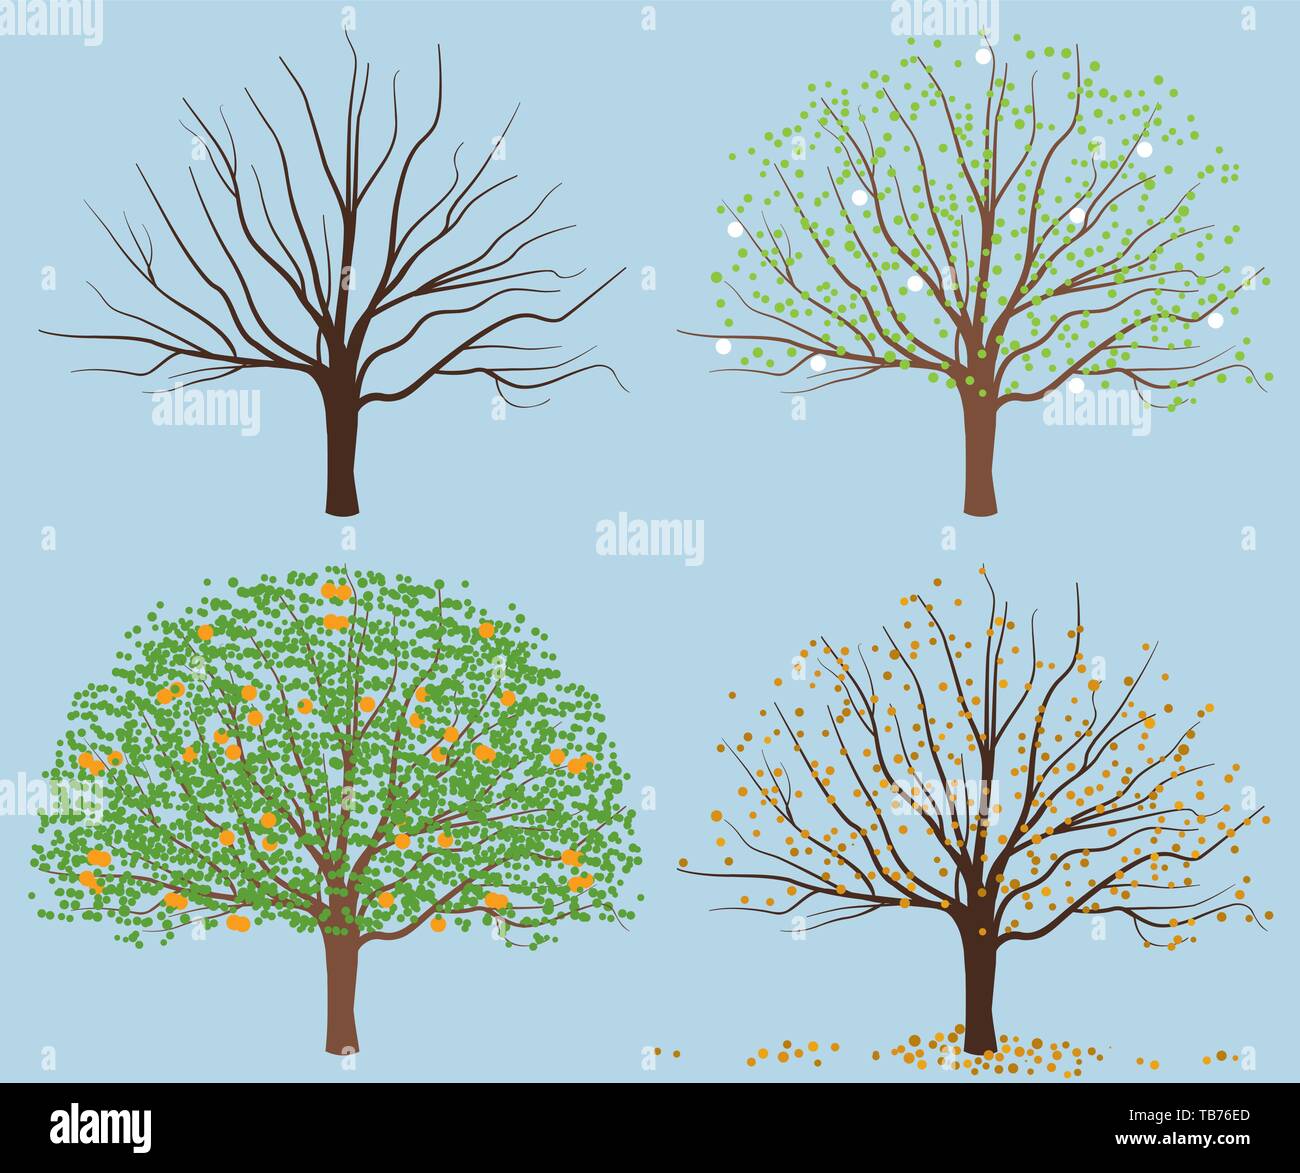 Vector illustration. Season tree. Dry, flourish with leaves and fruits Stock Vector